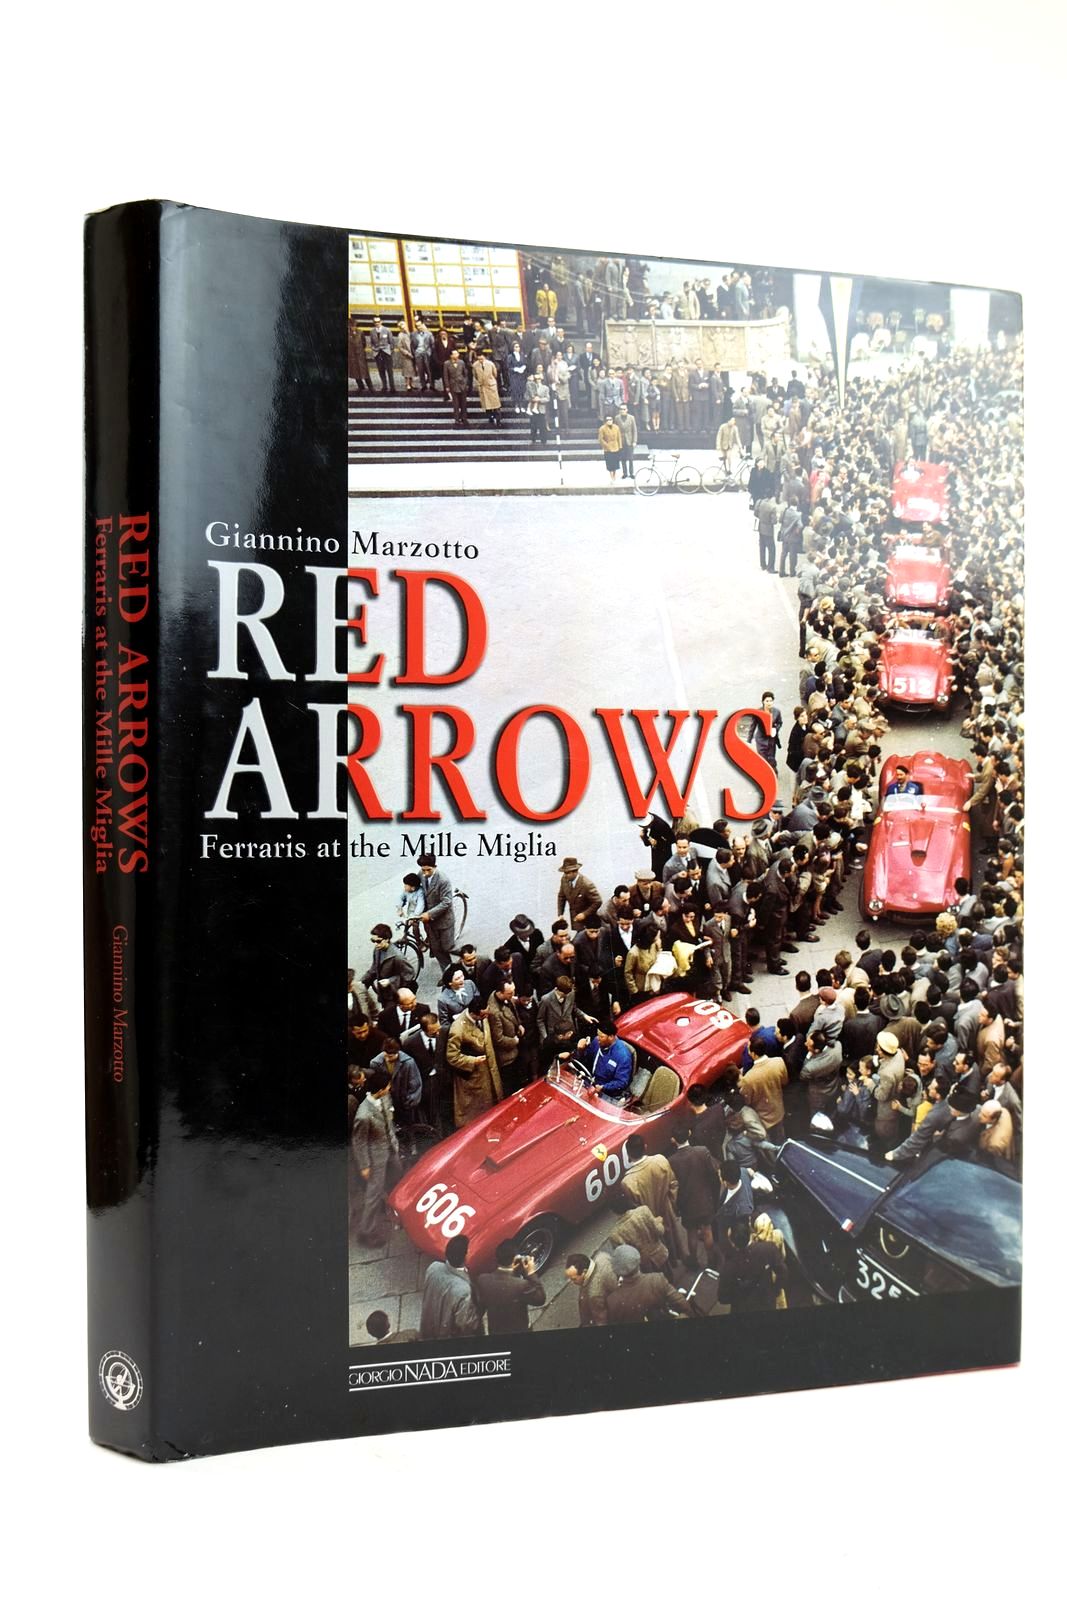 Photo of RED ARROWS FERRARIS AT THE MILLE MIGLIA written by Marzotto, Giannino Cassano, Sergio published by Giorgio Nada Editore (STOCK CODE: 2131781)  for sale by Stella & Rose's Books